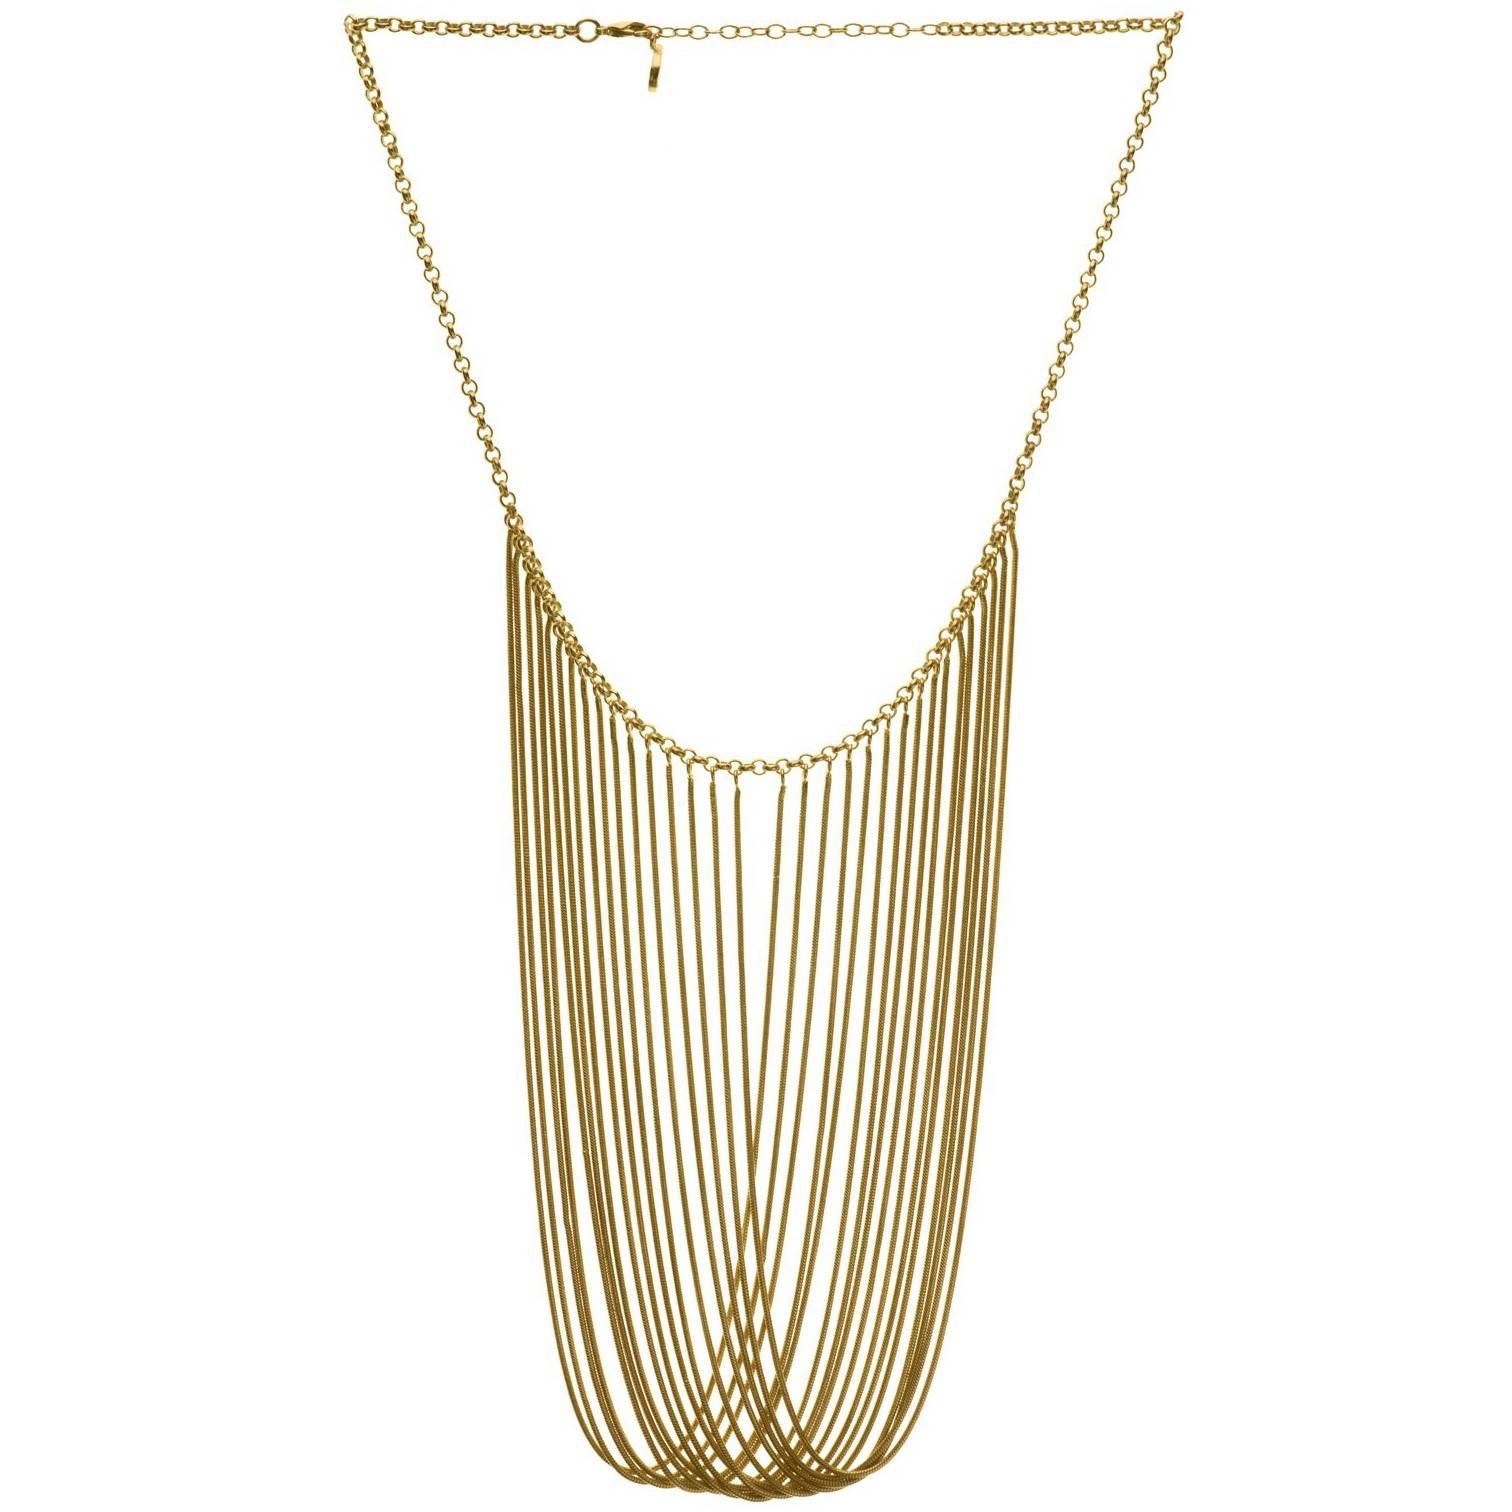 Necklace Statement Multi Snake Chain Gold-Plated Brass Greek Jewelry For Sale